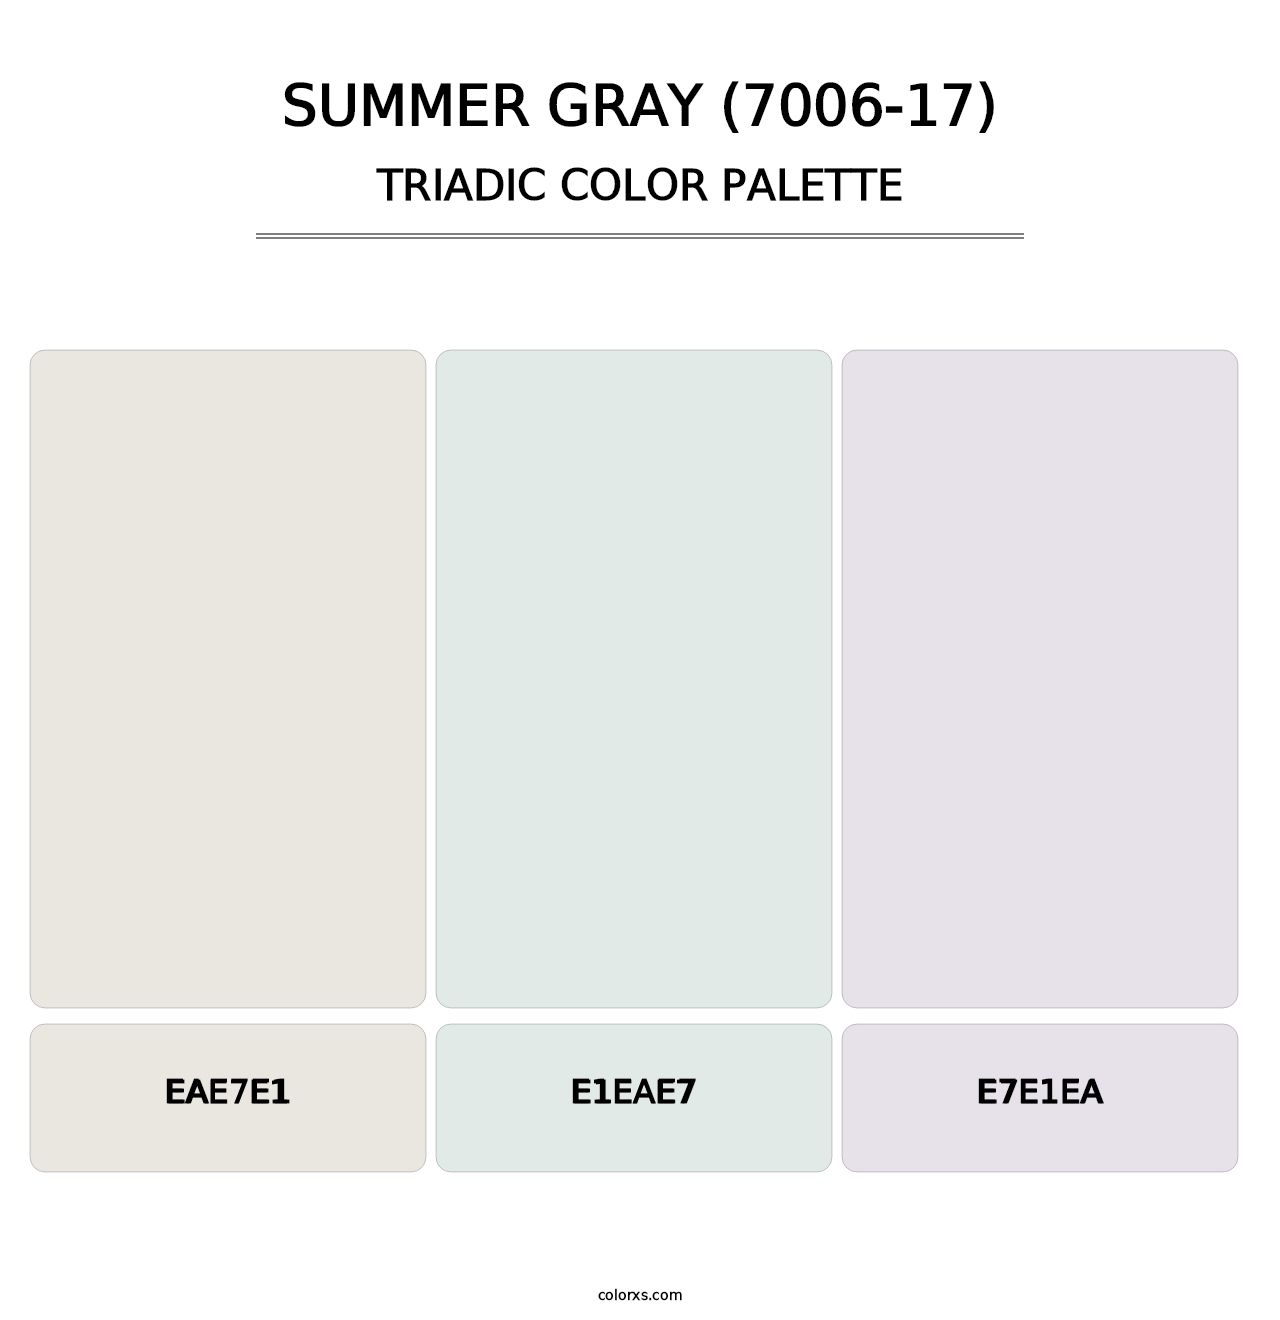 Summer Gray (7006-17) - Triadic Color Palette